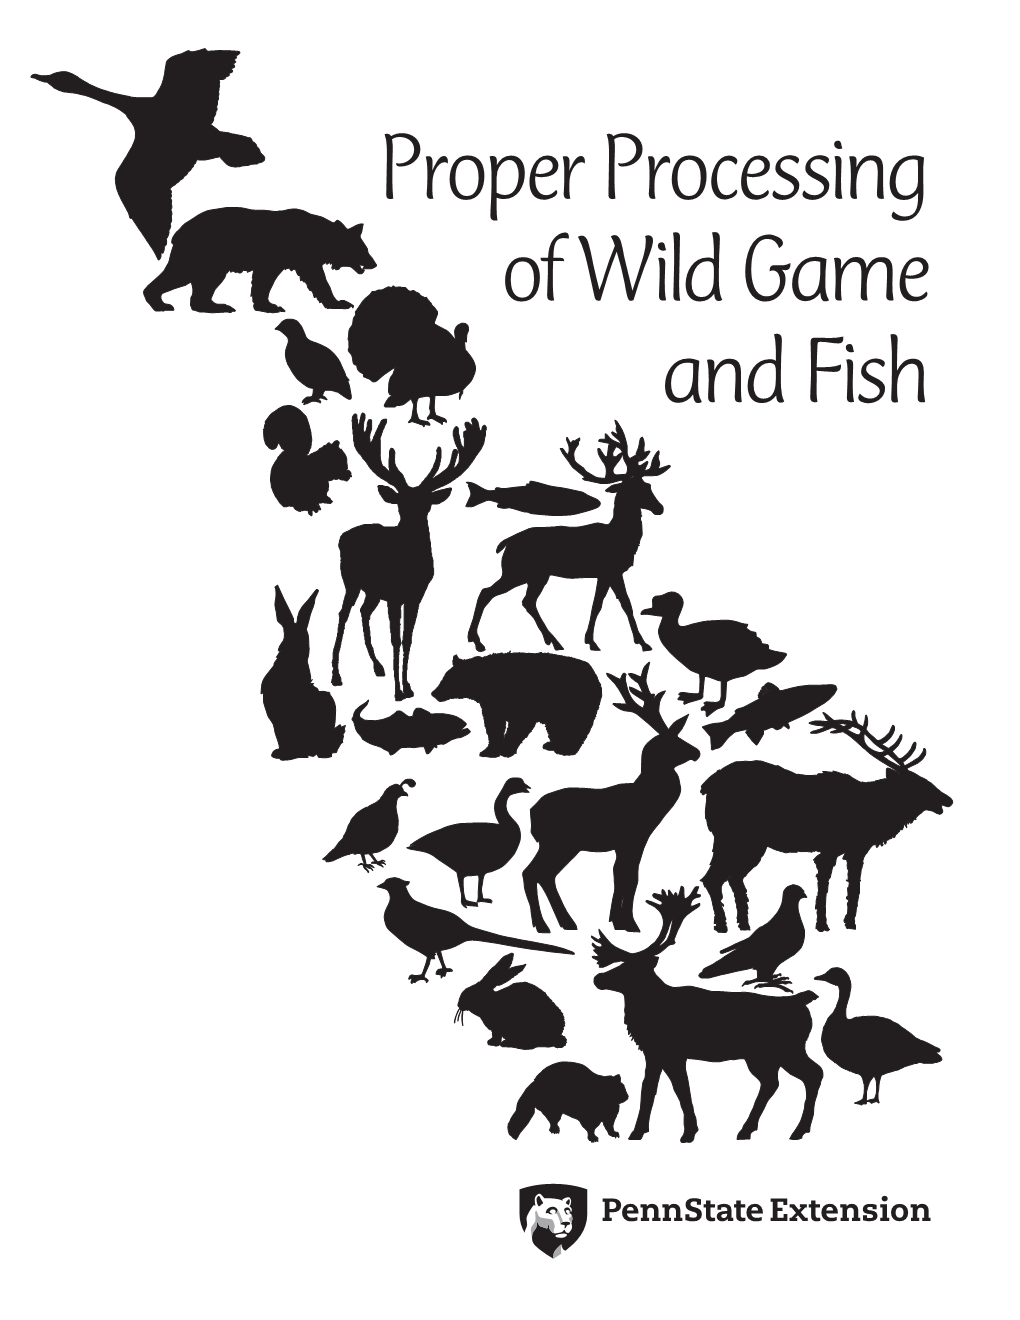 Proper Processing of Wild Game and Fish CONTENTS INTRODUCTION